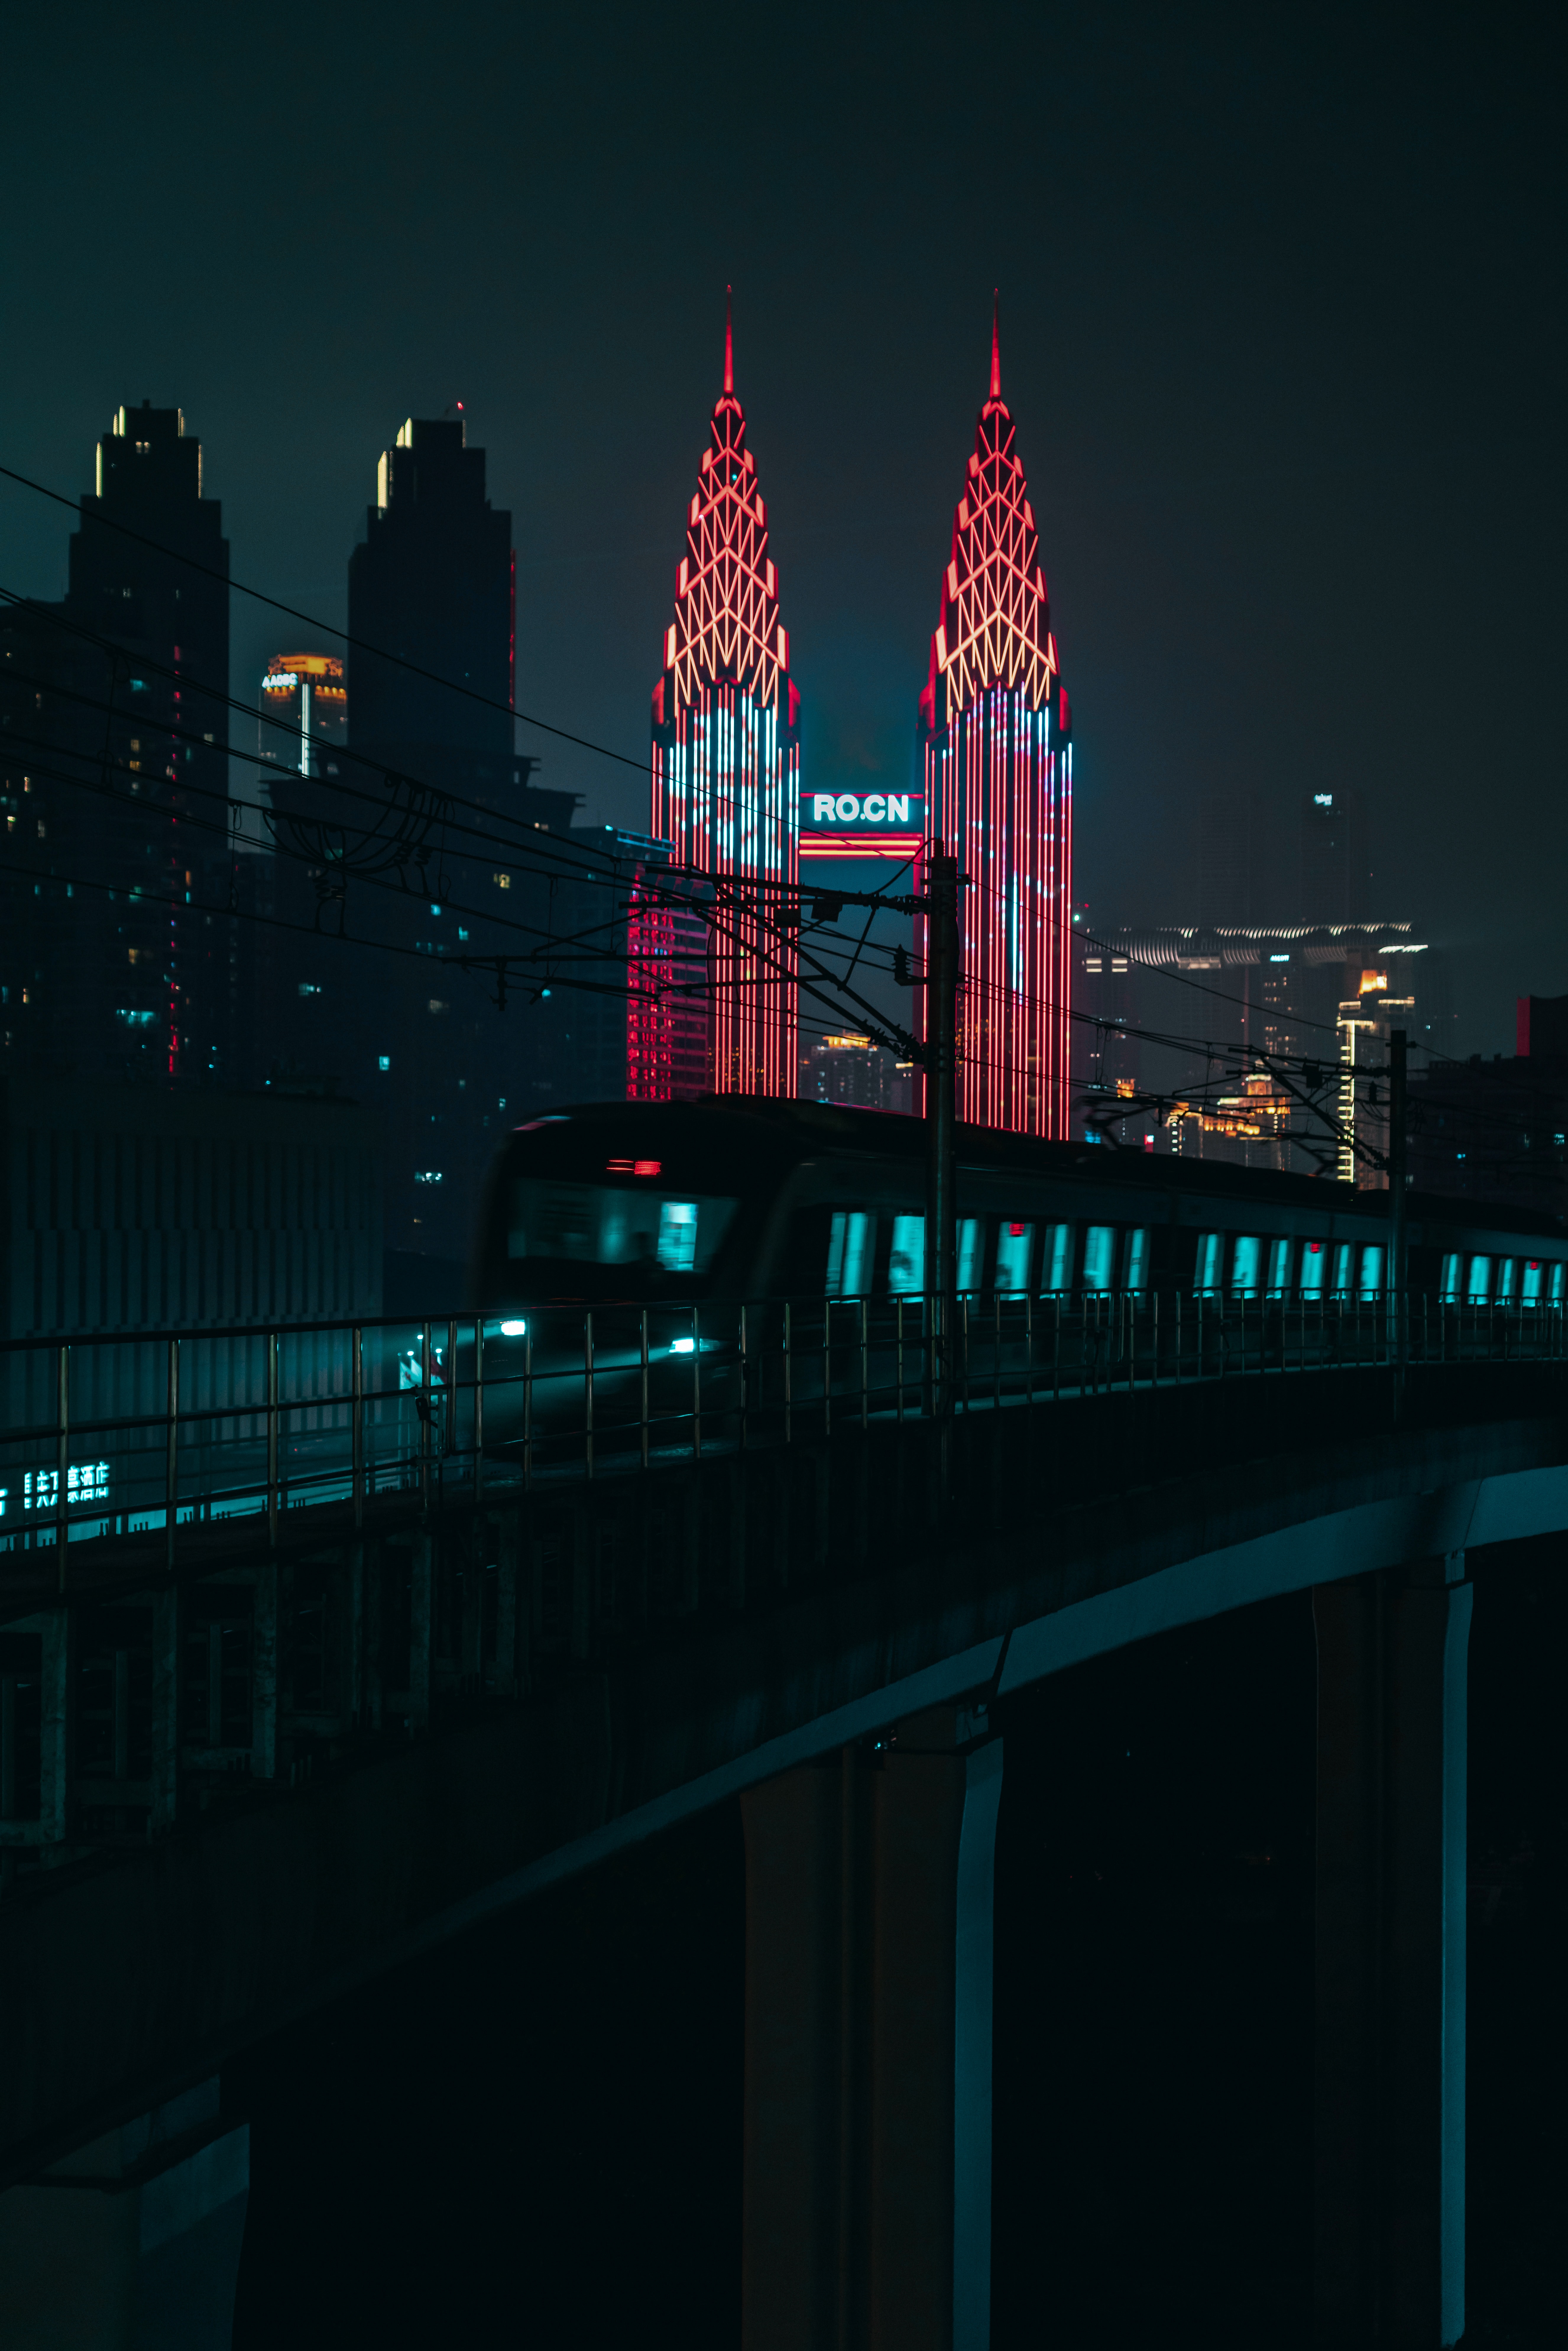 night city, train, cities, architecture, building, backlight, illumination wallpapers for tablet